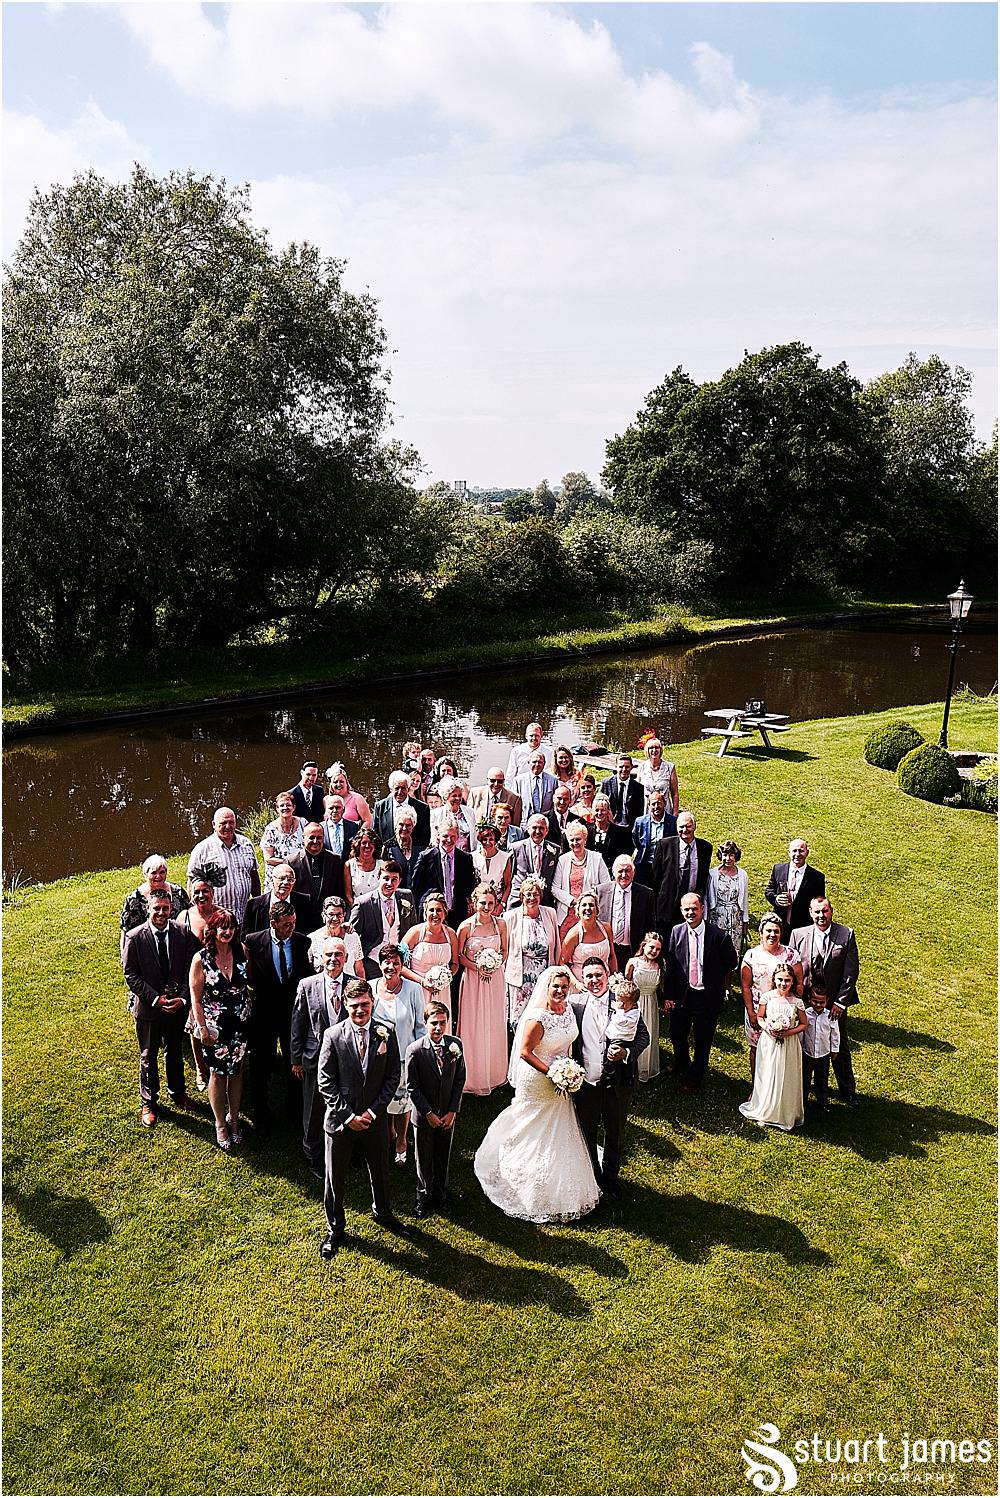 Family photographs at The Moat House in Acton Trussell by Penkridge Wedding Photographer Stuart James